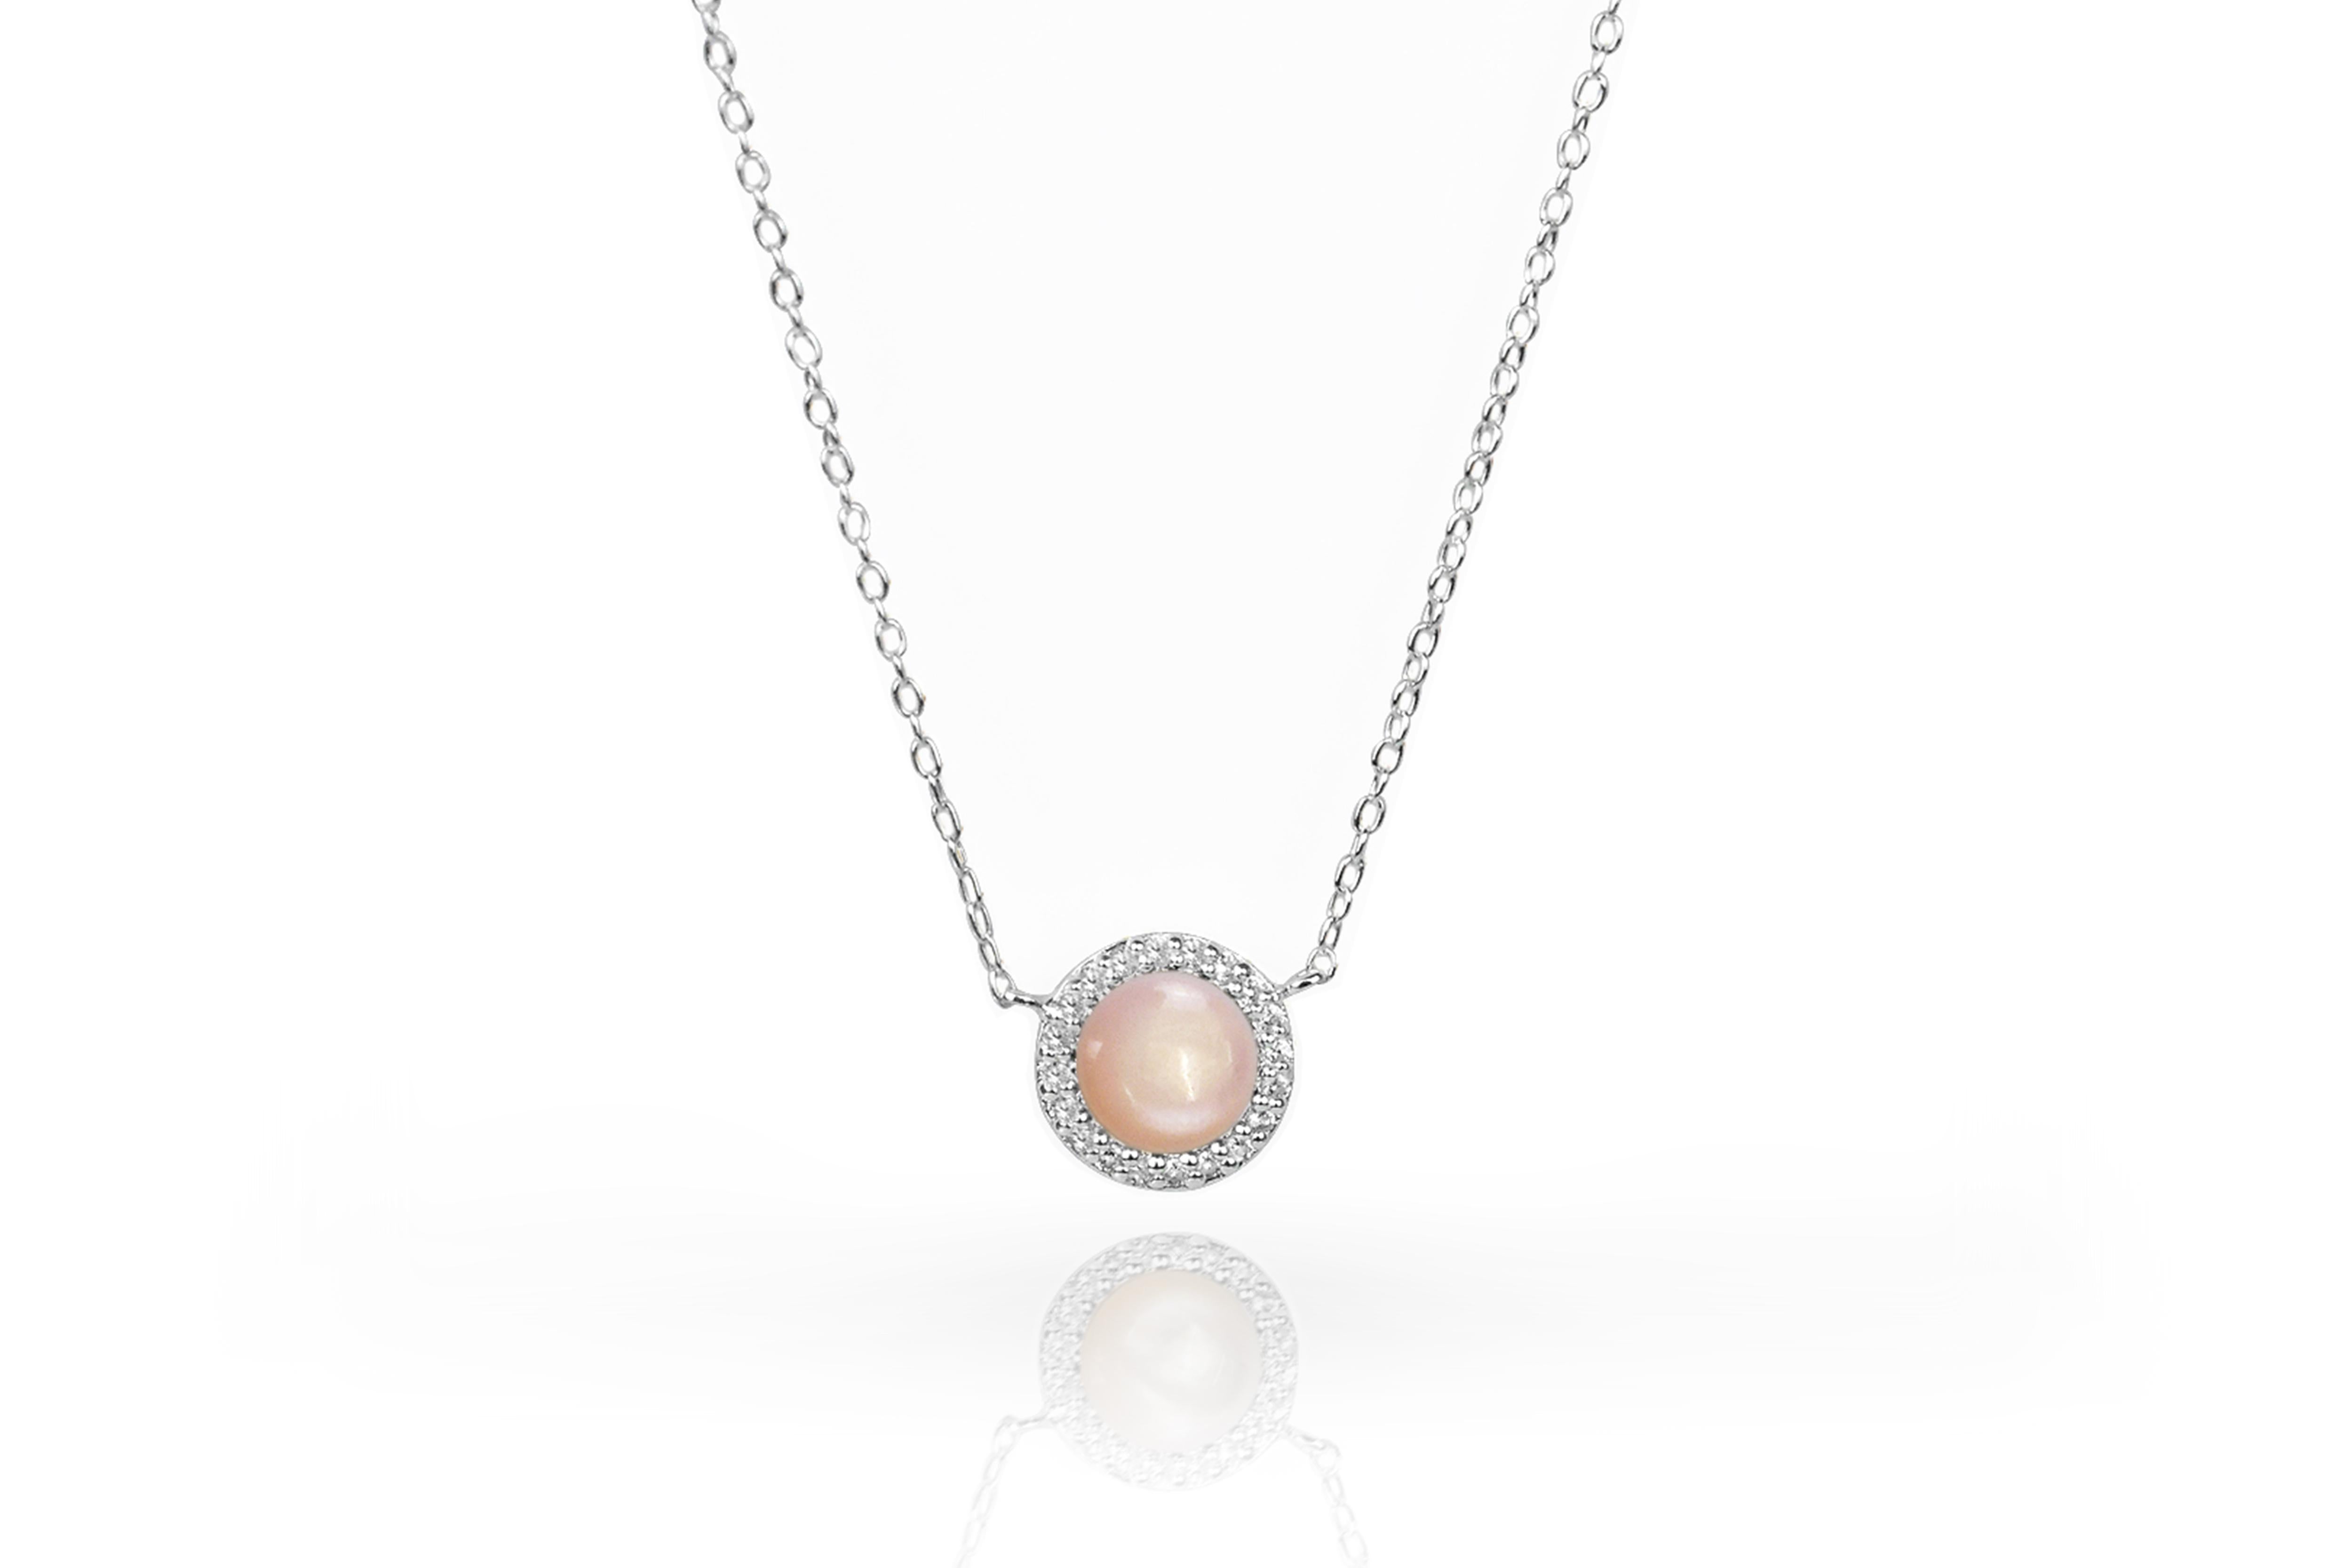 Gemstone Circle Necklace is made of 10k solid gold available in three colors of gold and four options of gemstone.
Gold: White Gold / Rose Gold / Yellow Gold.
Gemstone: Abalone / Tahitian Black MOP / White MOP / Pink MOP

Delicate Minimal Necklace